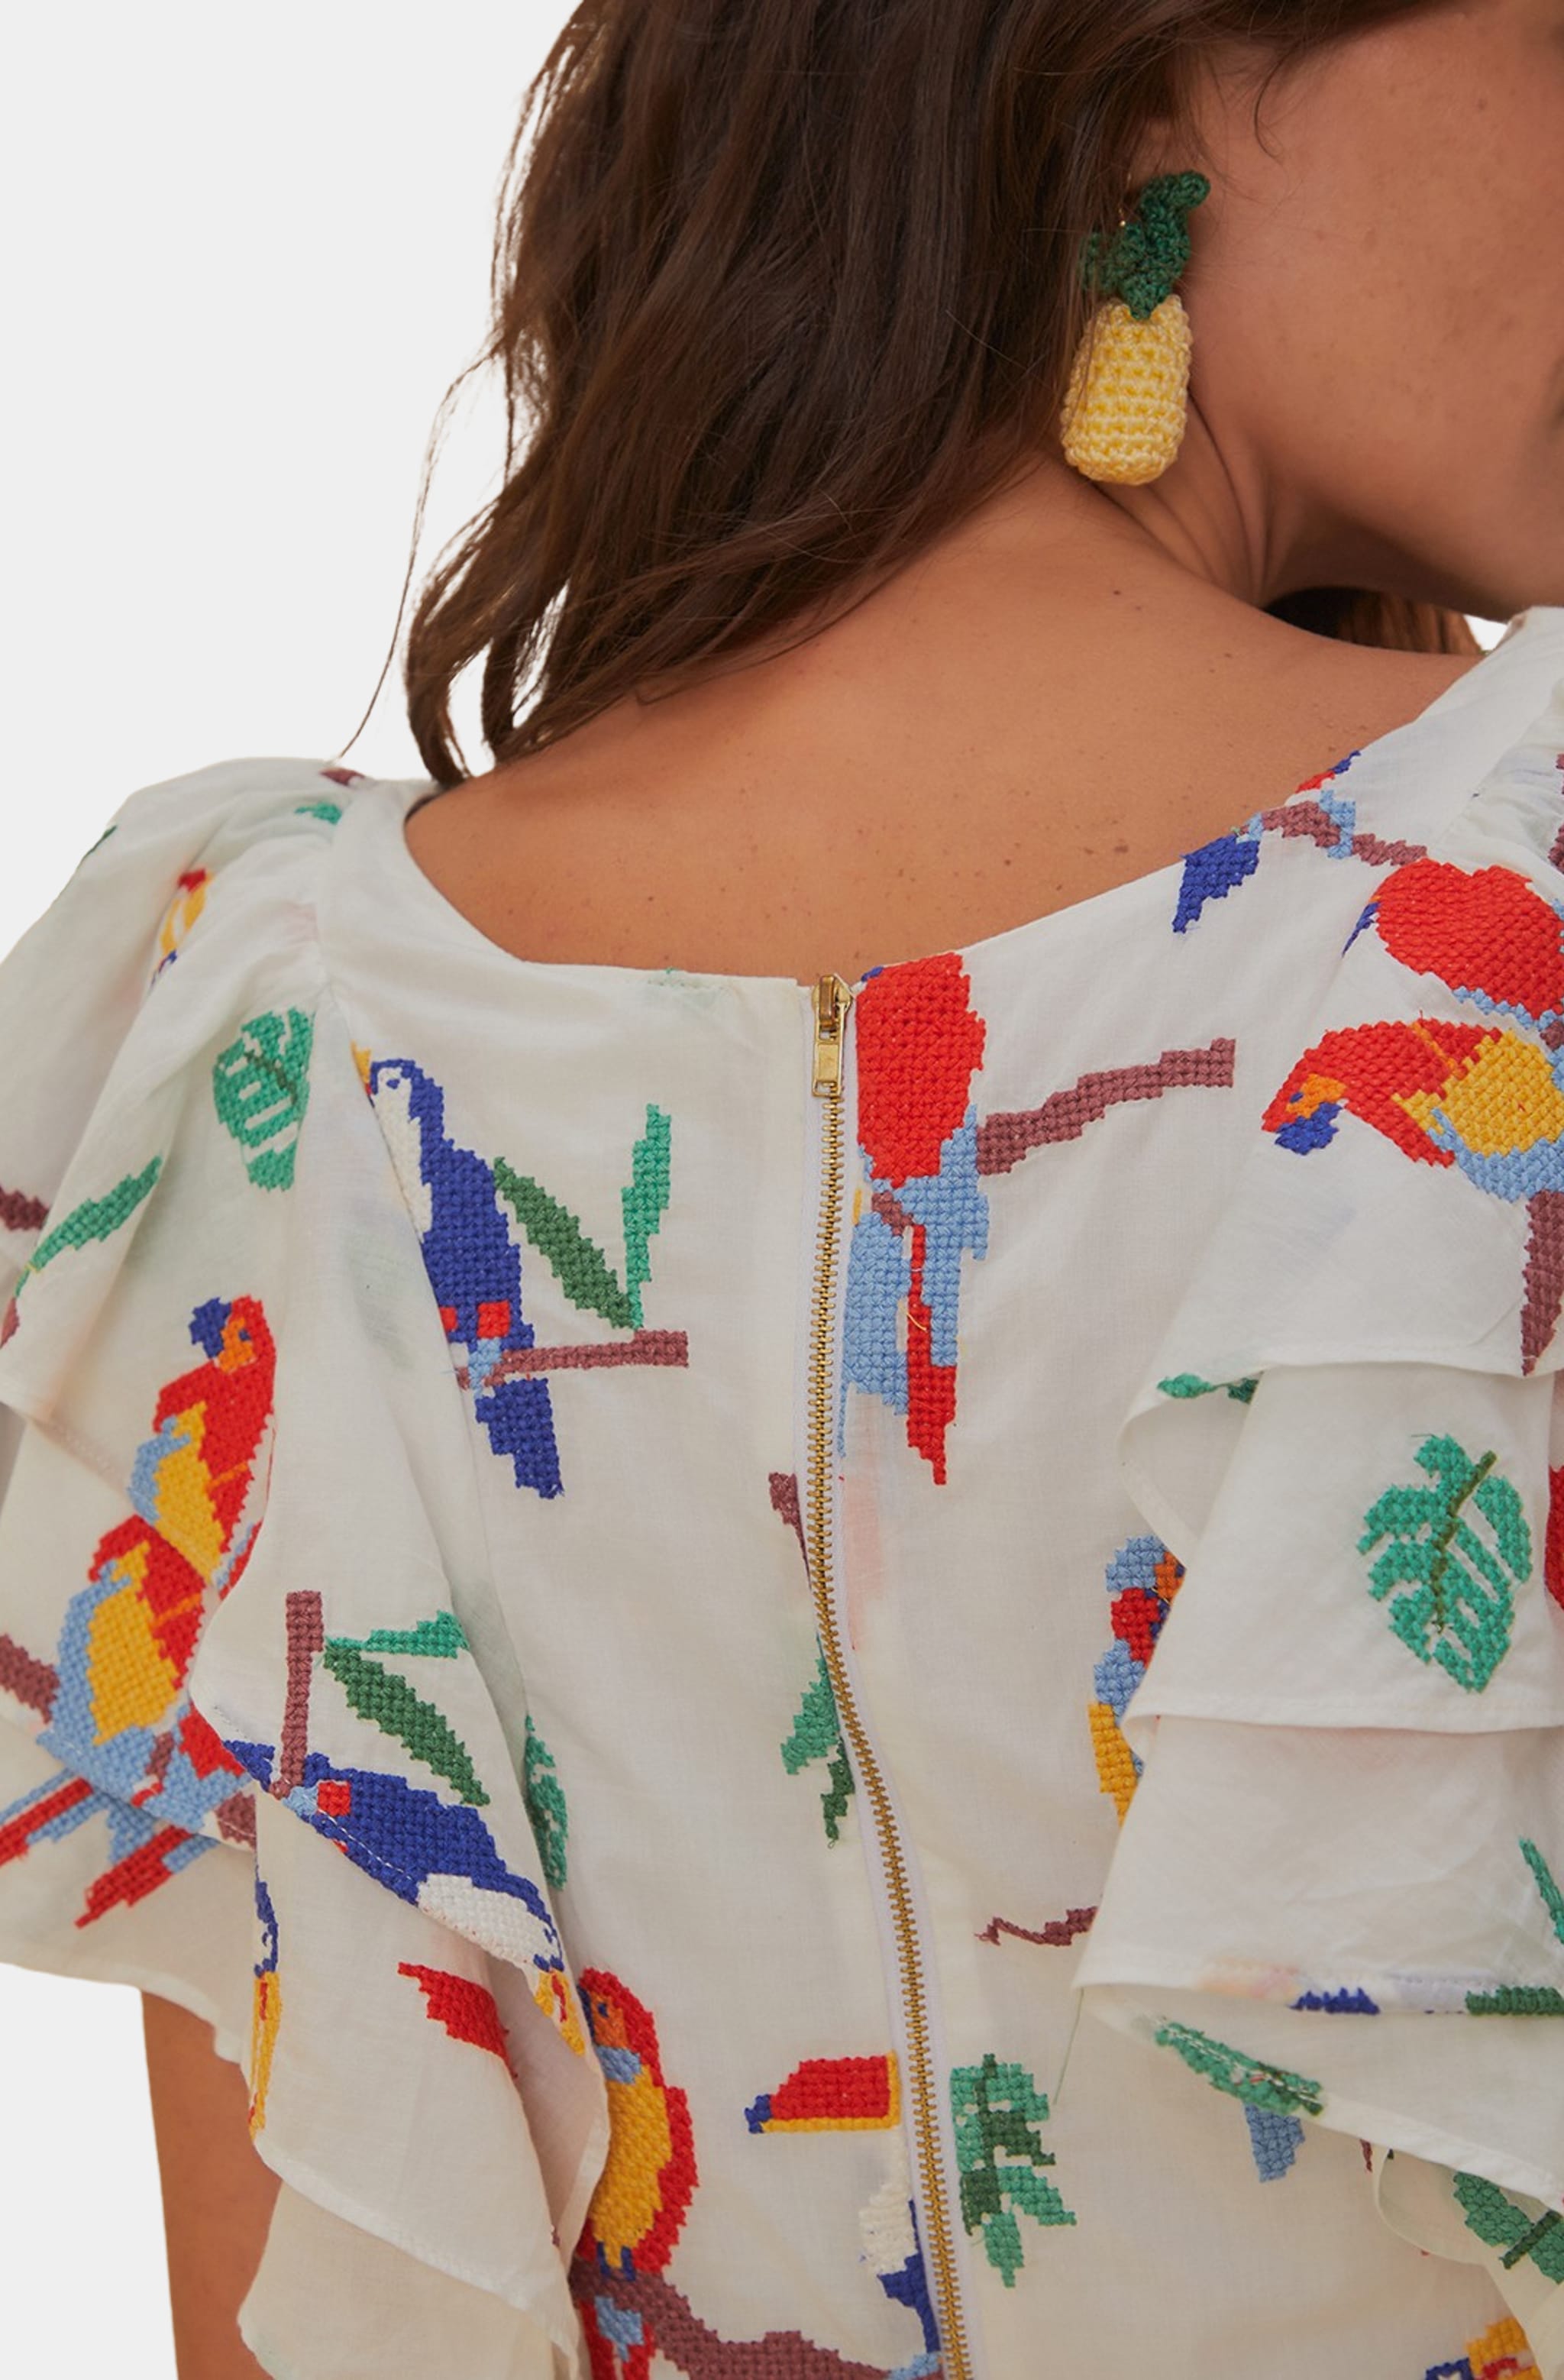 Off-White Stitched Birds Blouse Short Sleeves